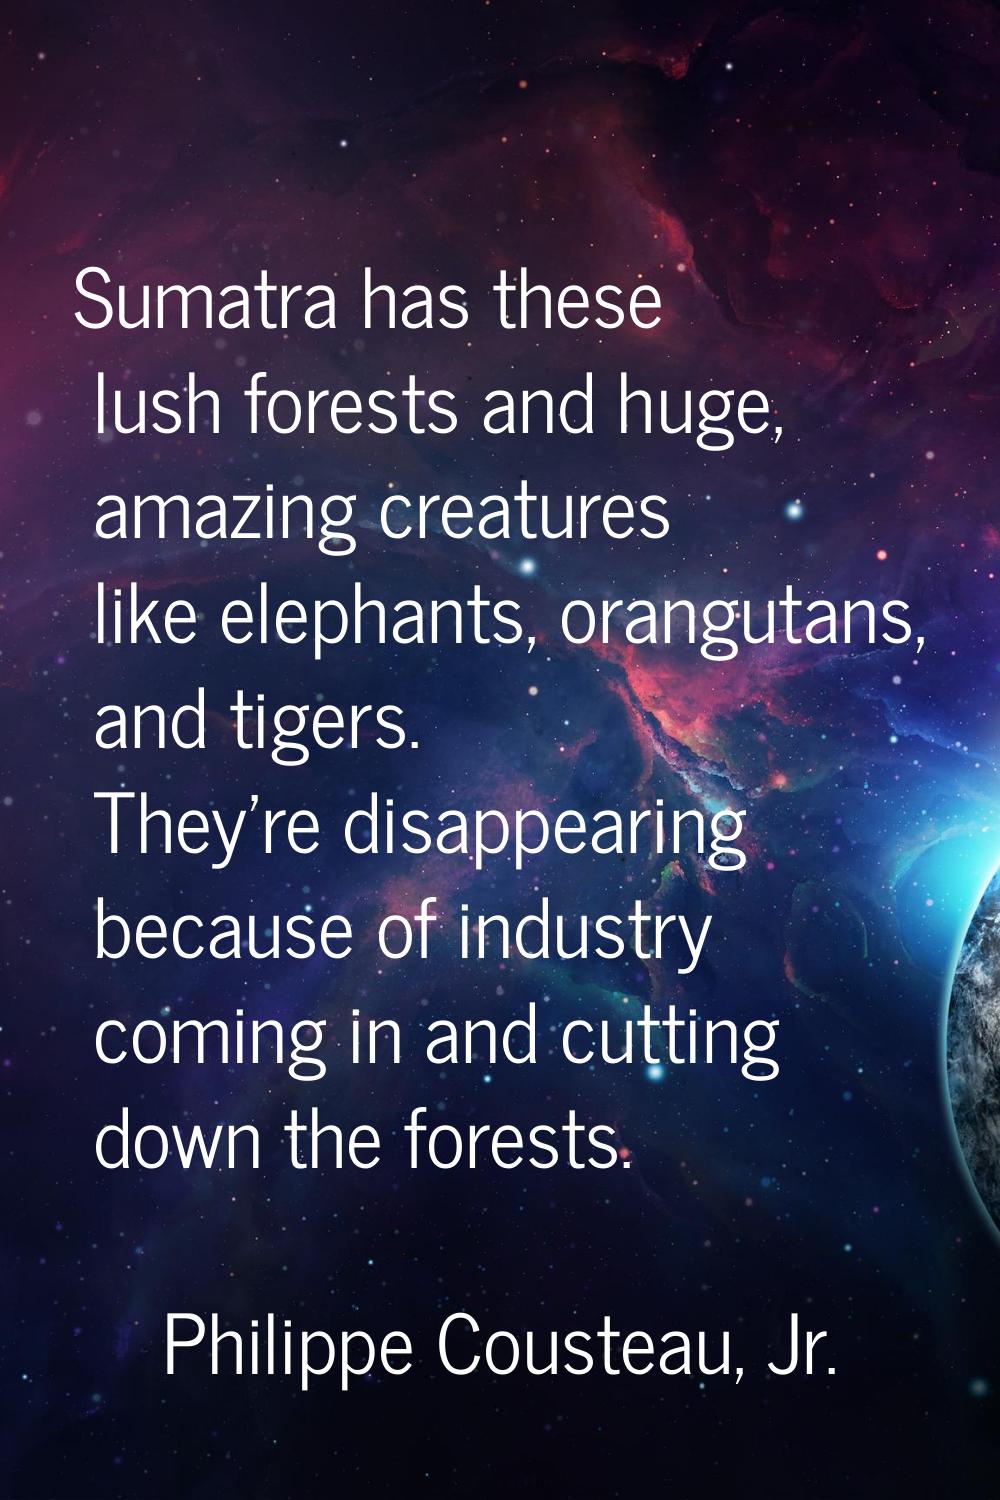 Sumatra has these lush forests and huge, amazing creatures like elephants, orangutans, and tigers. 